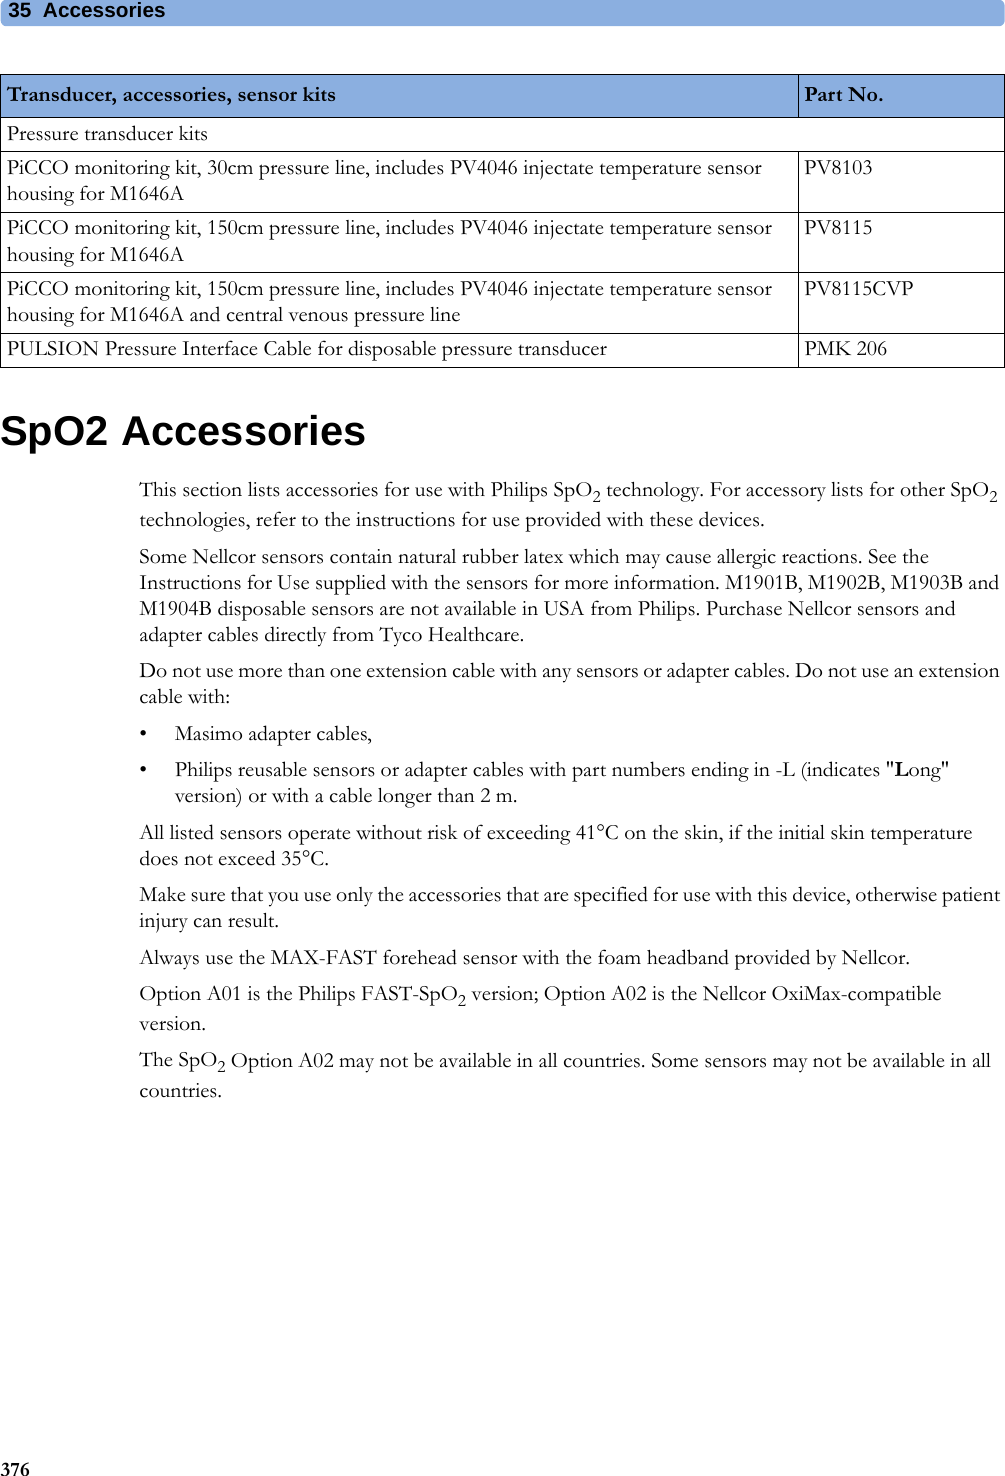 35 Accessories376SpO2 AccessoriesThis section lists accessories for use with Philips SpO2 technology. For accessory lists for other SpO2 technologies, refer to the instructions for use provided with these devices.Some Nellcor sensors contain natural rubber latex which may cause allergic reactions. See the Instructions for Use supplied with the sensors for more information. M1901B, M1902B, M1903B and M1904B disposable sensors are not available in USA from Philips. Purchase Nellcor sensors and adapter cables directly from Tyco Healthcare.Do not use more than one extension cable with any sensors or adapter cables. Do not use an extension cable with:• Masimo adapter cables,• Philips reusable sensors or adapter cables with part numbers ending in -L (indicates &quot;Long&quot; version) or with a cable longer than 2 m.All listed sensors operate without risk of exceeding 41°C on the skin, if the initial skin temperature does not exceed 35°C.Make sure that you use only the accessories that are specified for use with this device, otherwise patient injury can result.Always use the MAX-FAST forehead sensor with the foam headband provided by Nellcor.Option A01 is the Philips FAST-SpO2 version; Option A02 is the Nellcor OxiMax-compatible version.The SpO2 Option A02 may not be available in all countries. Some sensors may not be available in all countries.Pressure transducer kitsPiCCO monitoring kit, 30cm pressure line, includes PV4046 injectate temperature sensor housing for M1646APV8103PiCCO monitoring kit, 150cm pressure line, includes PV4046 injectate temperature sensor housing for M1646APV8115PiCCO monitoring kit, 150cm pressure line, includes PV4046 injectate temperature sensor housing for M1646A and central venous pressure linePV8115CVPPULSION Pressure Interface Cable for disposable pressure transducer PMK 206Transducer, accessories, sensor kits Part No.